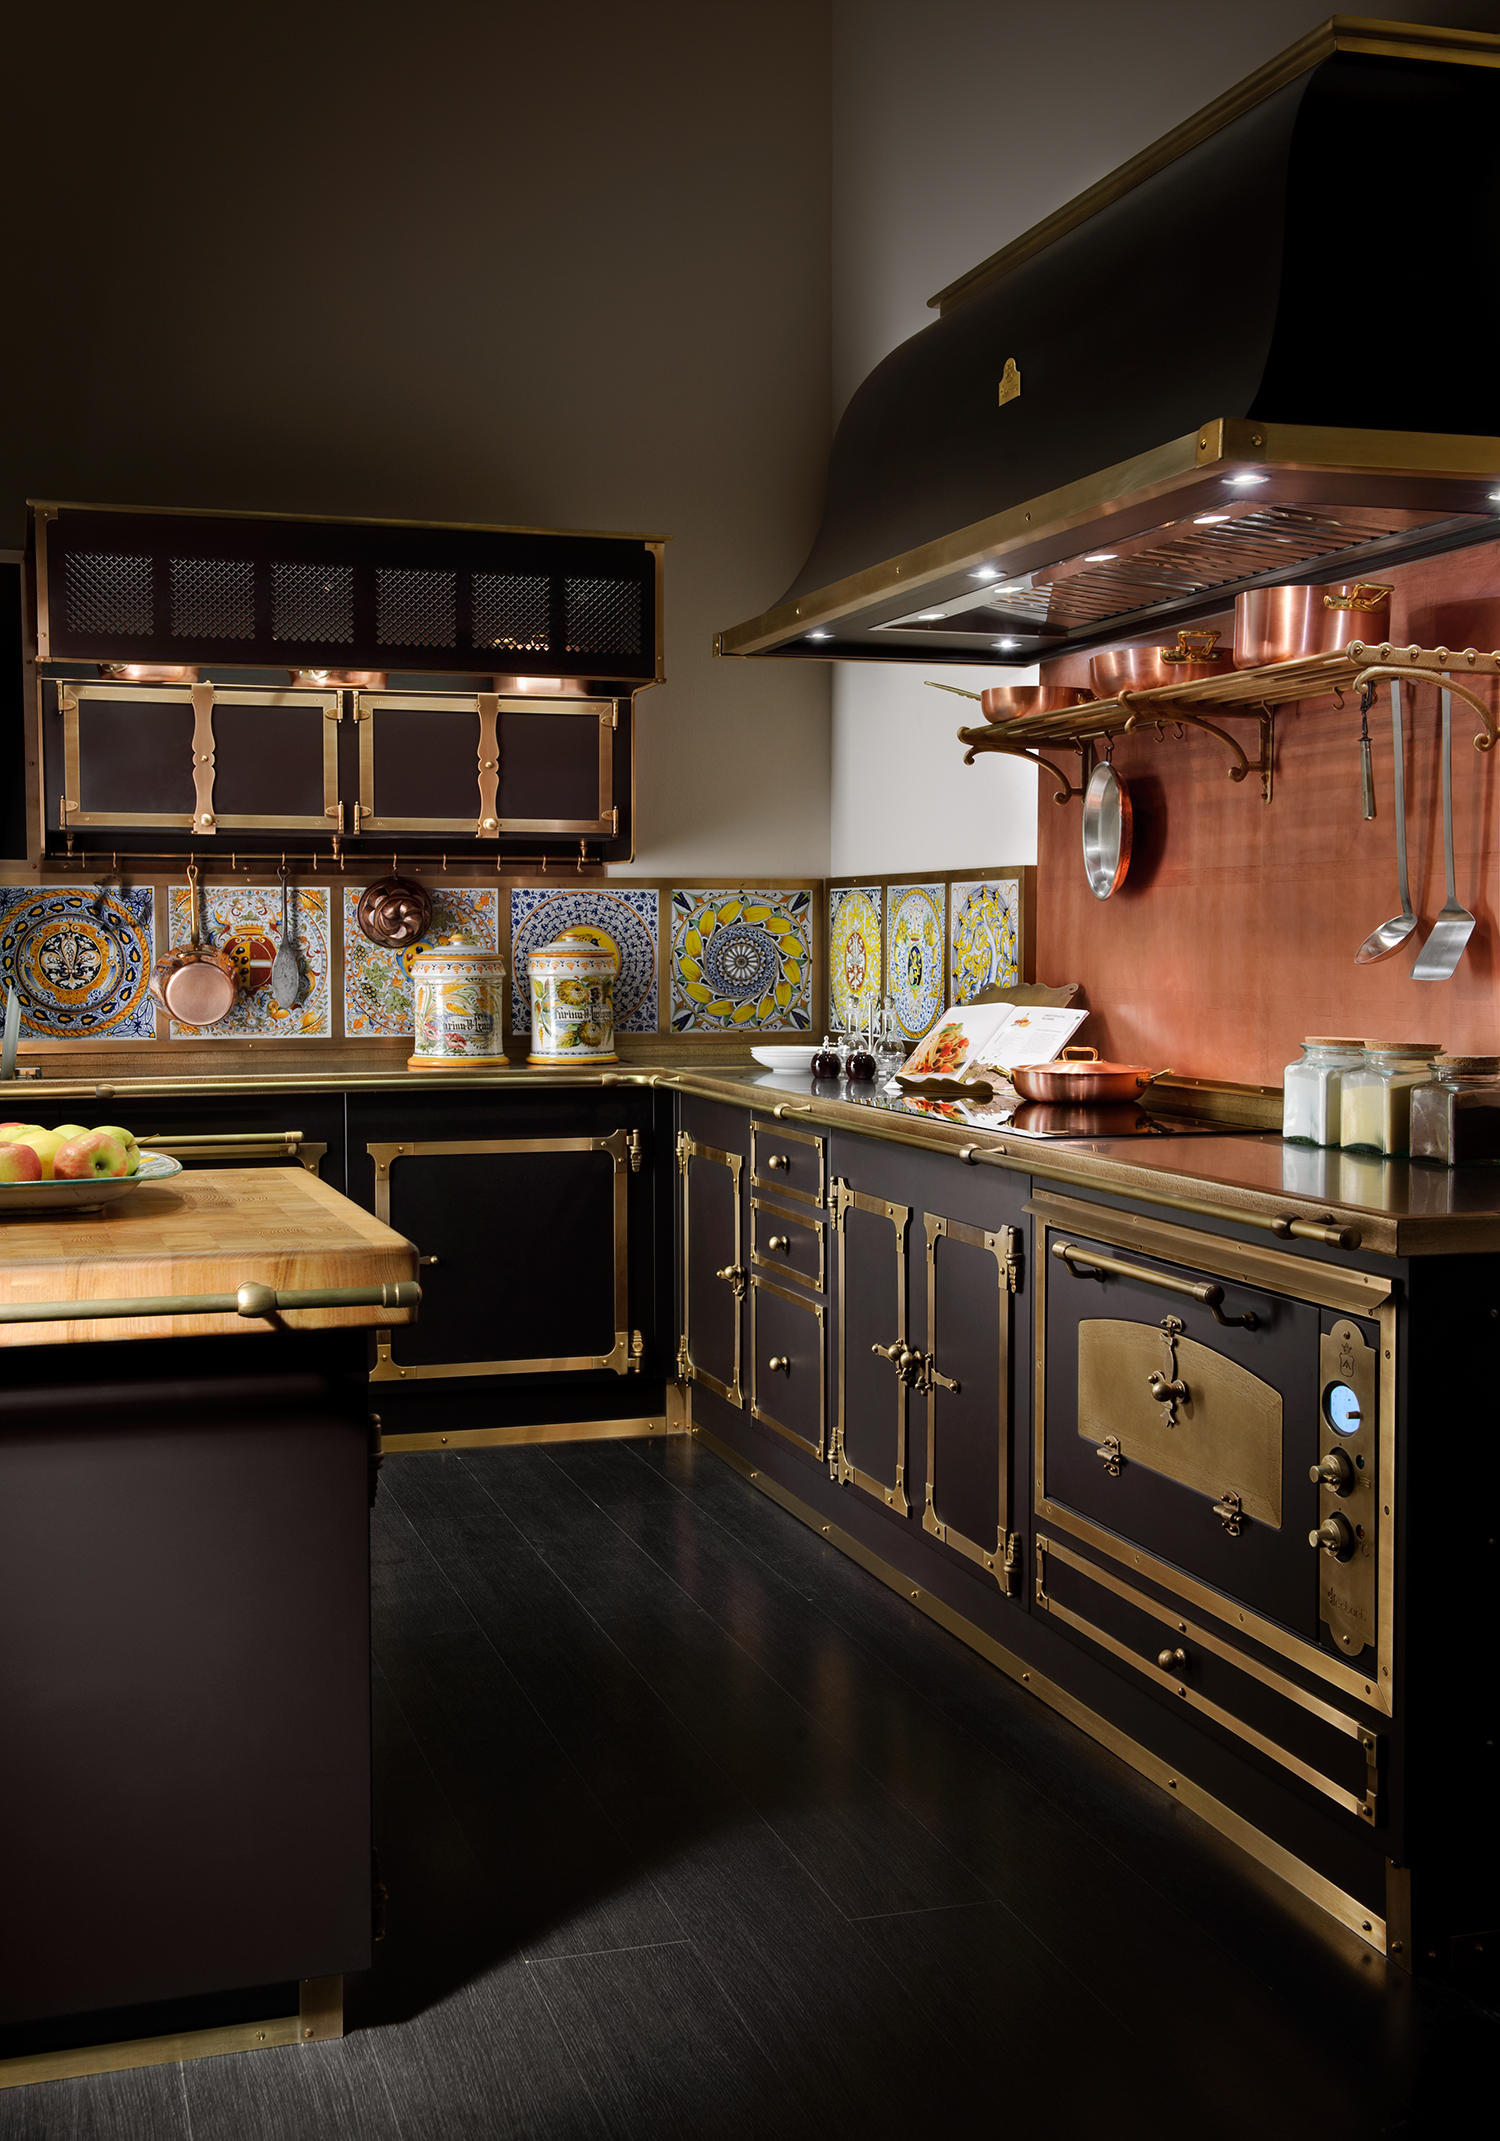 MEDICI PALACE KITCHEN Fitted Kitchens From Officine Gullo